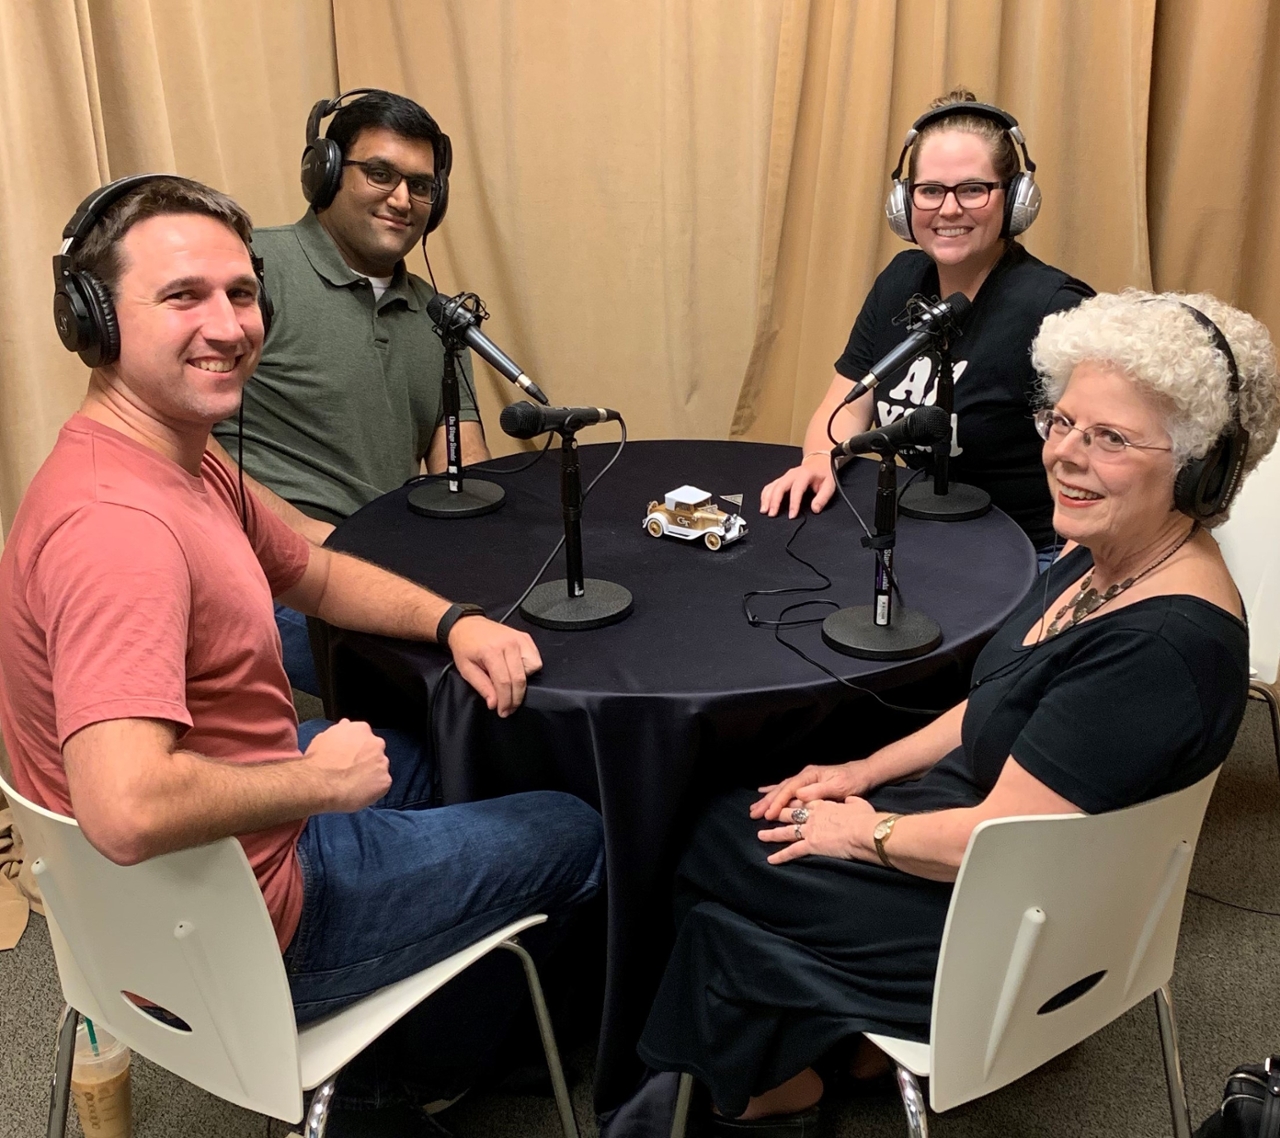 Stephen Stradley, Sunny Gupta, Jasmine Howard, and Dr. Patricia Mokhtarian join us in our first roundtable podcast discussing hot topics in the intersection of technology and mobility.